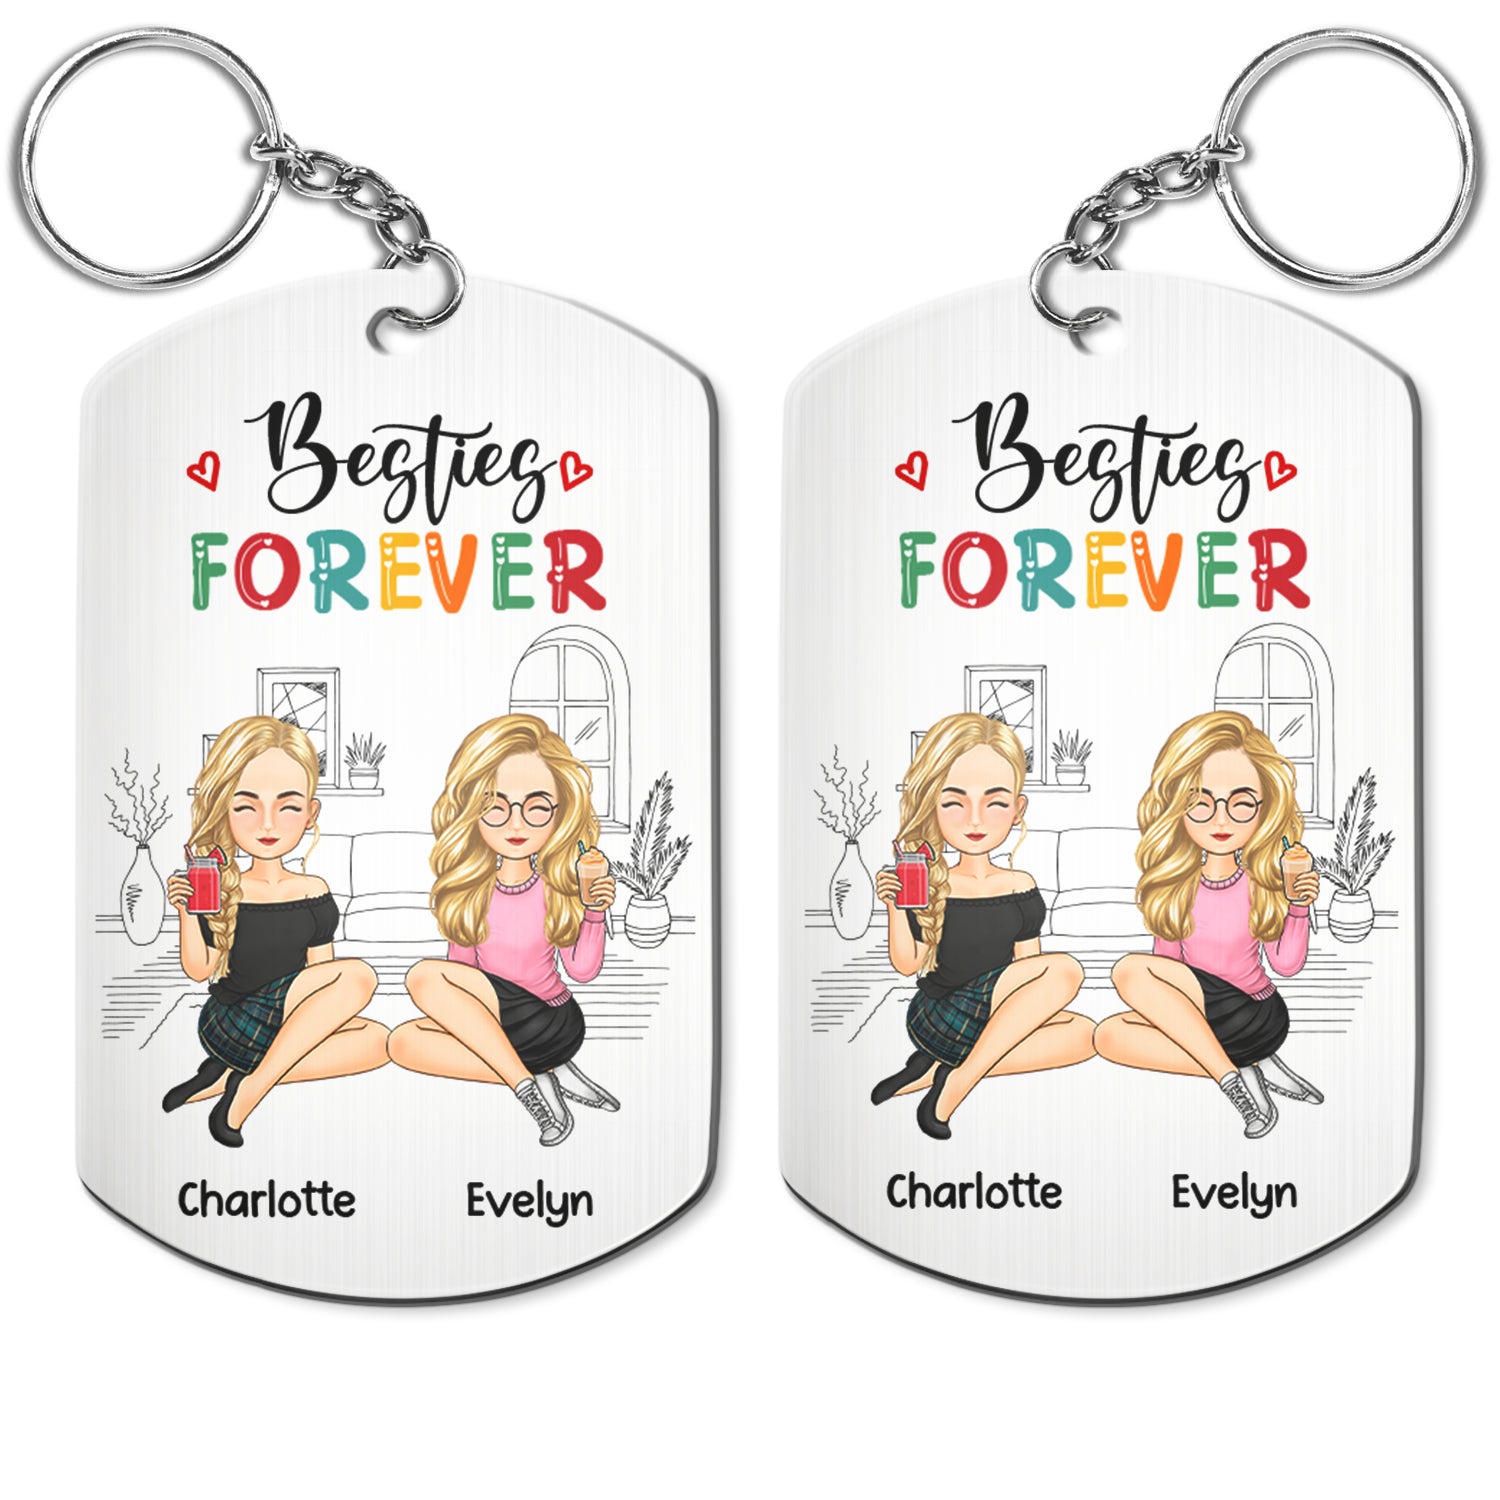 Besties Forever - Gift For Besties - Personalized Aluminum Keychain